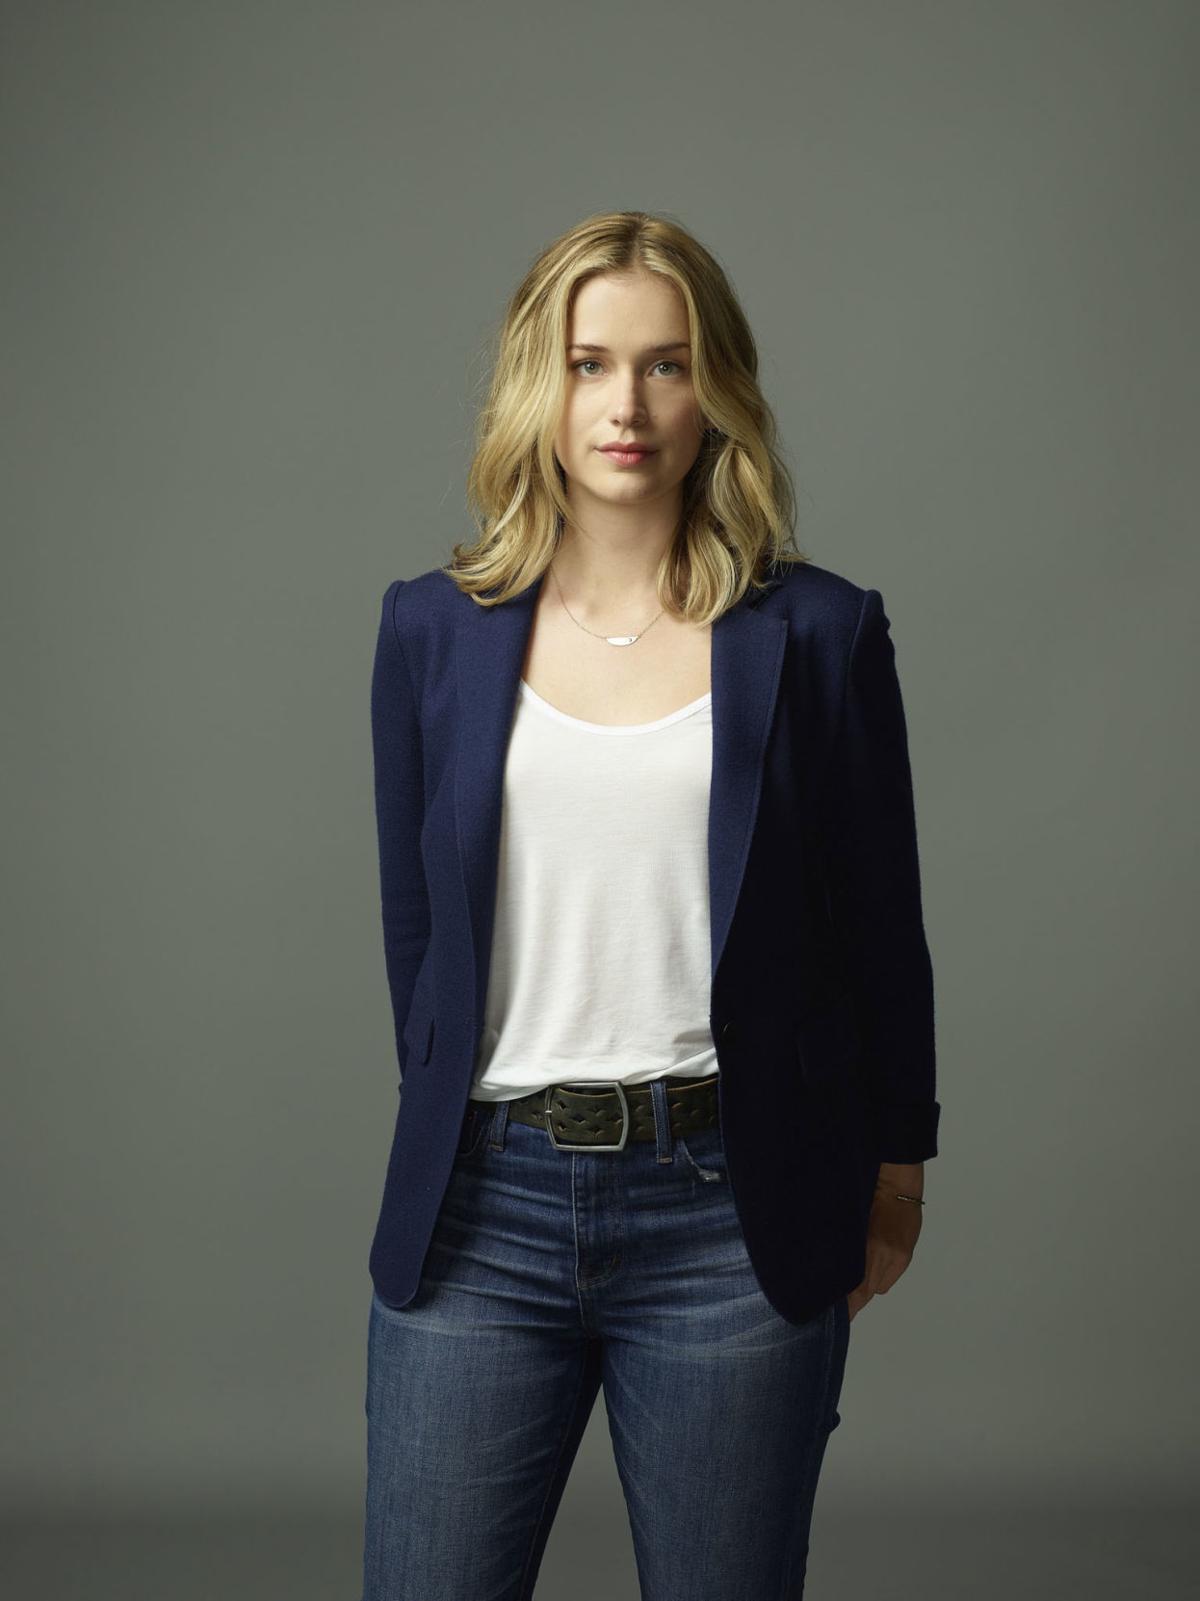 70+ Hot Pictures Of Elizabeth Lail Which Will Get You Addicted To Her Sexy Body 21